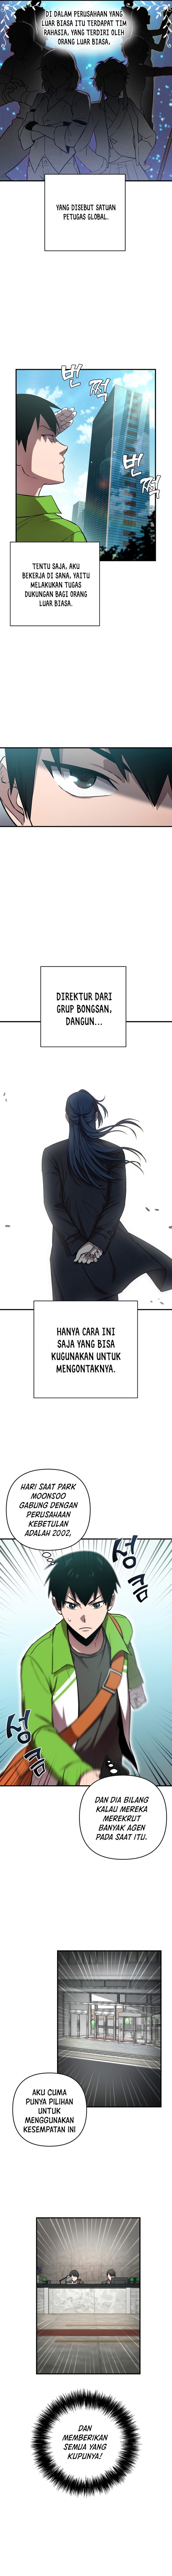 Cursed Manager’s Regression Chapter 04 10